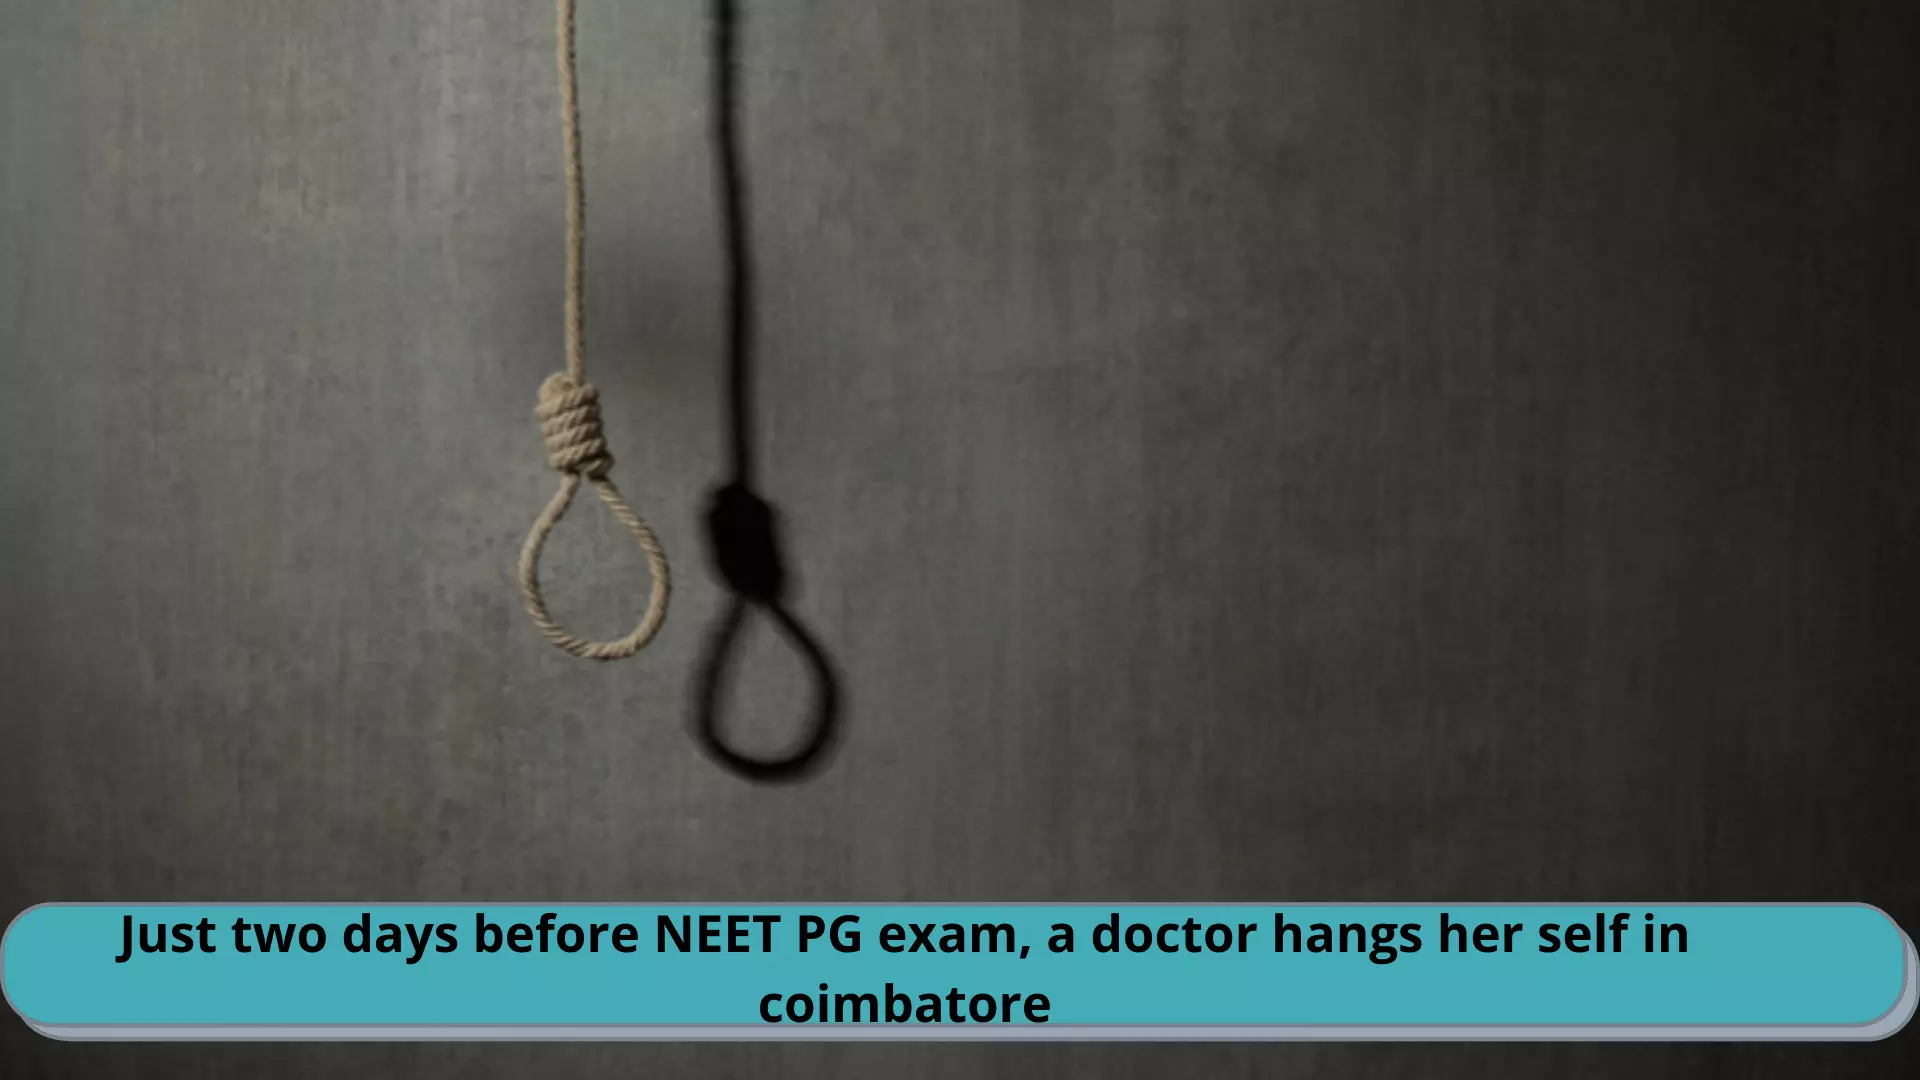 Just two days before NEET PG exam, doctor hangs her self in Coimbatore